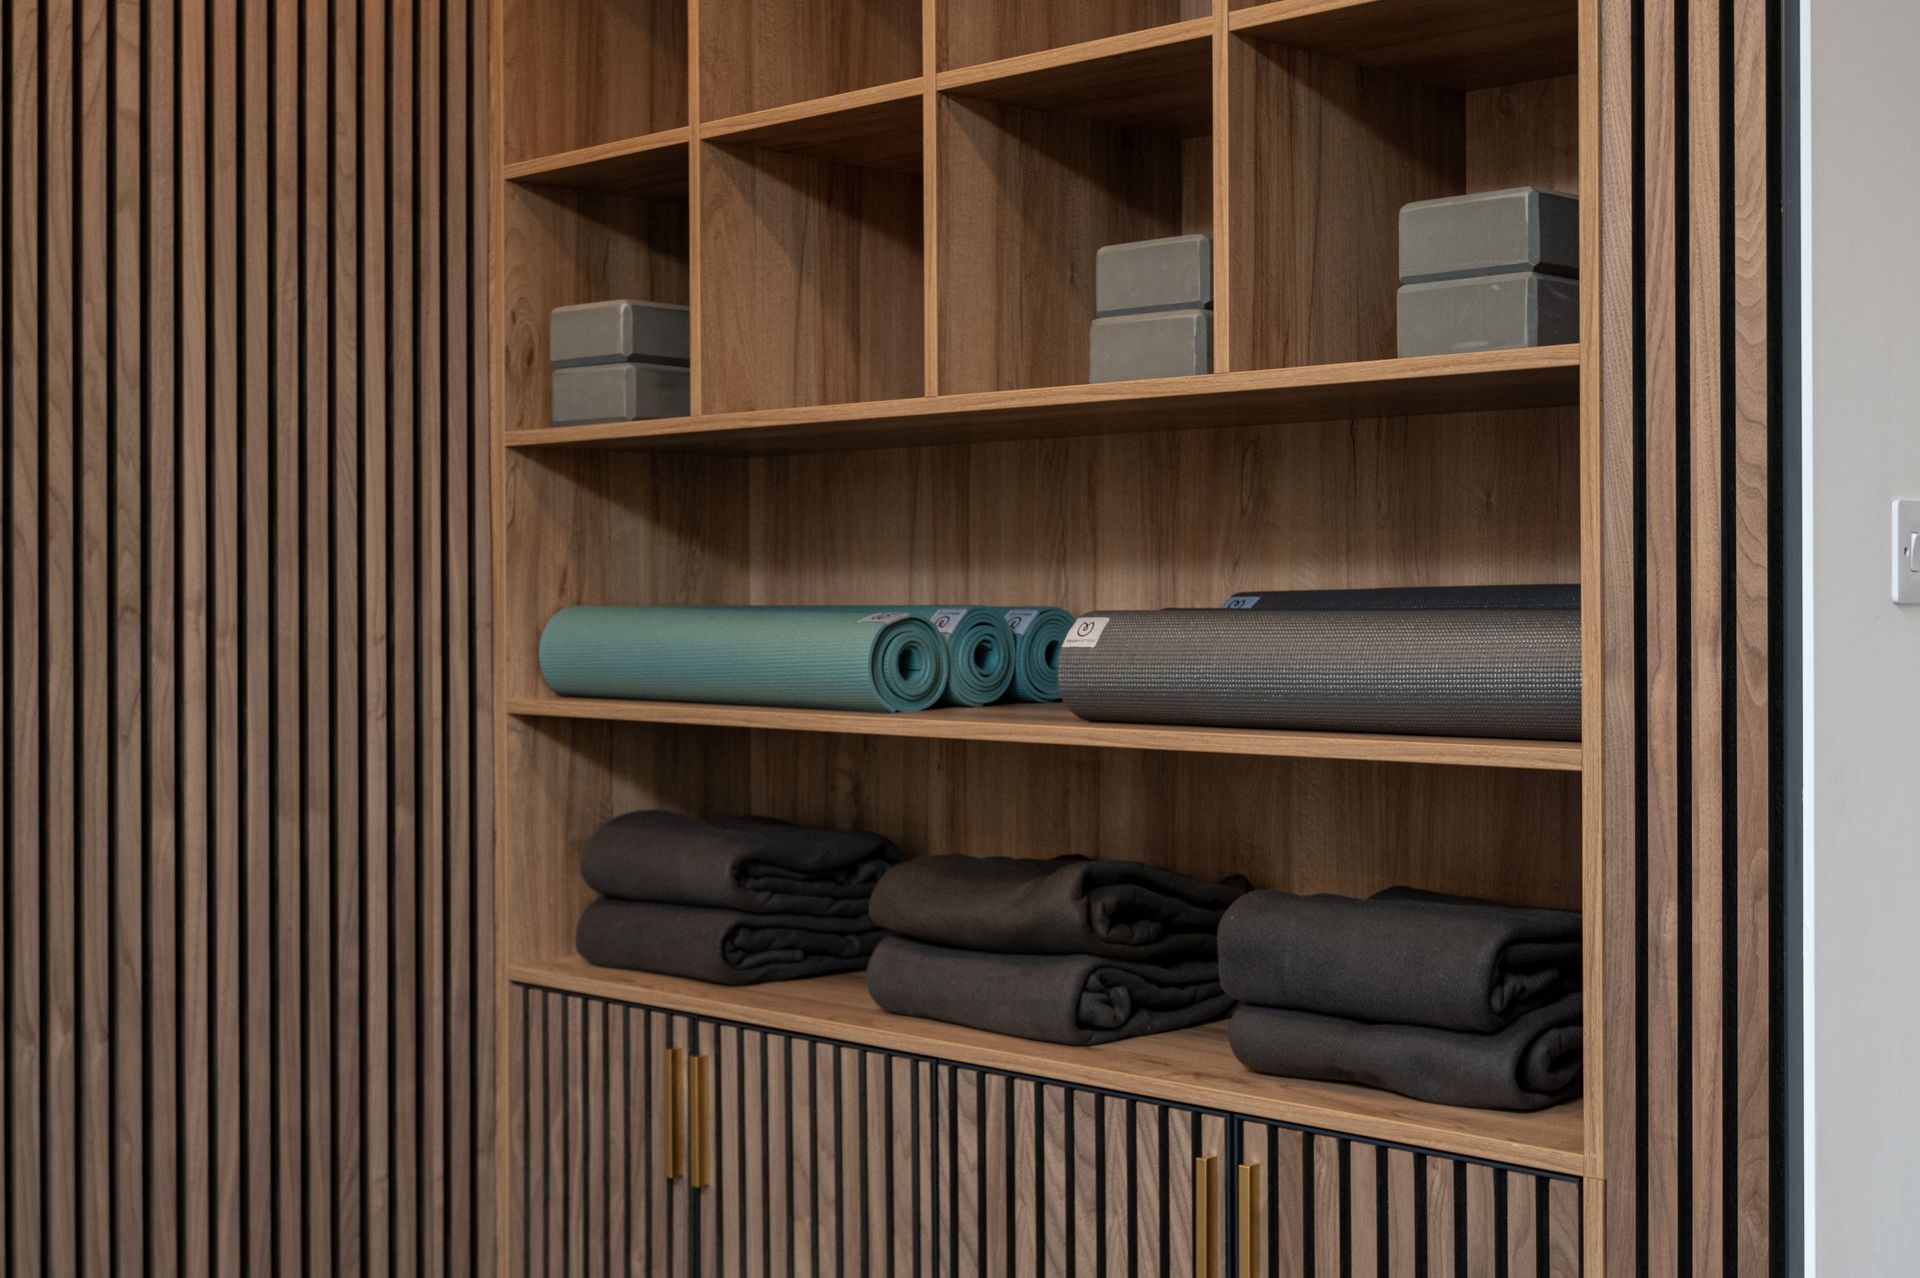 A wooden shelf filled with yoga mats and towels at Walton Court.